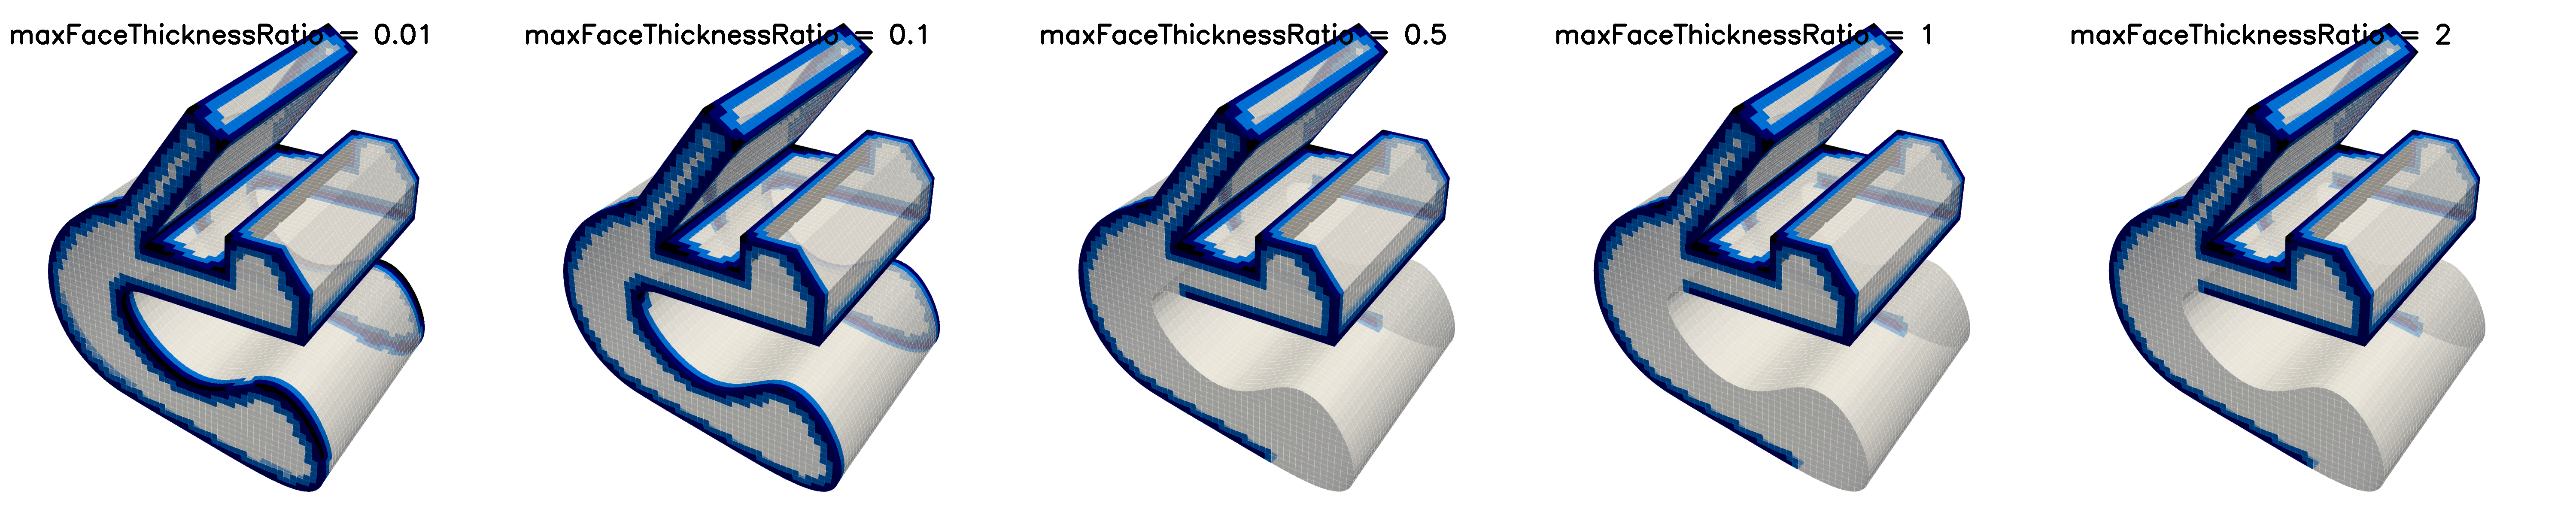 maxFaceThicknessRatioSurface